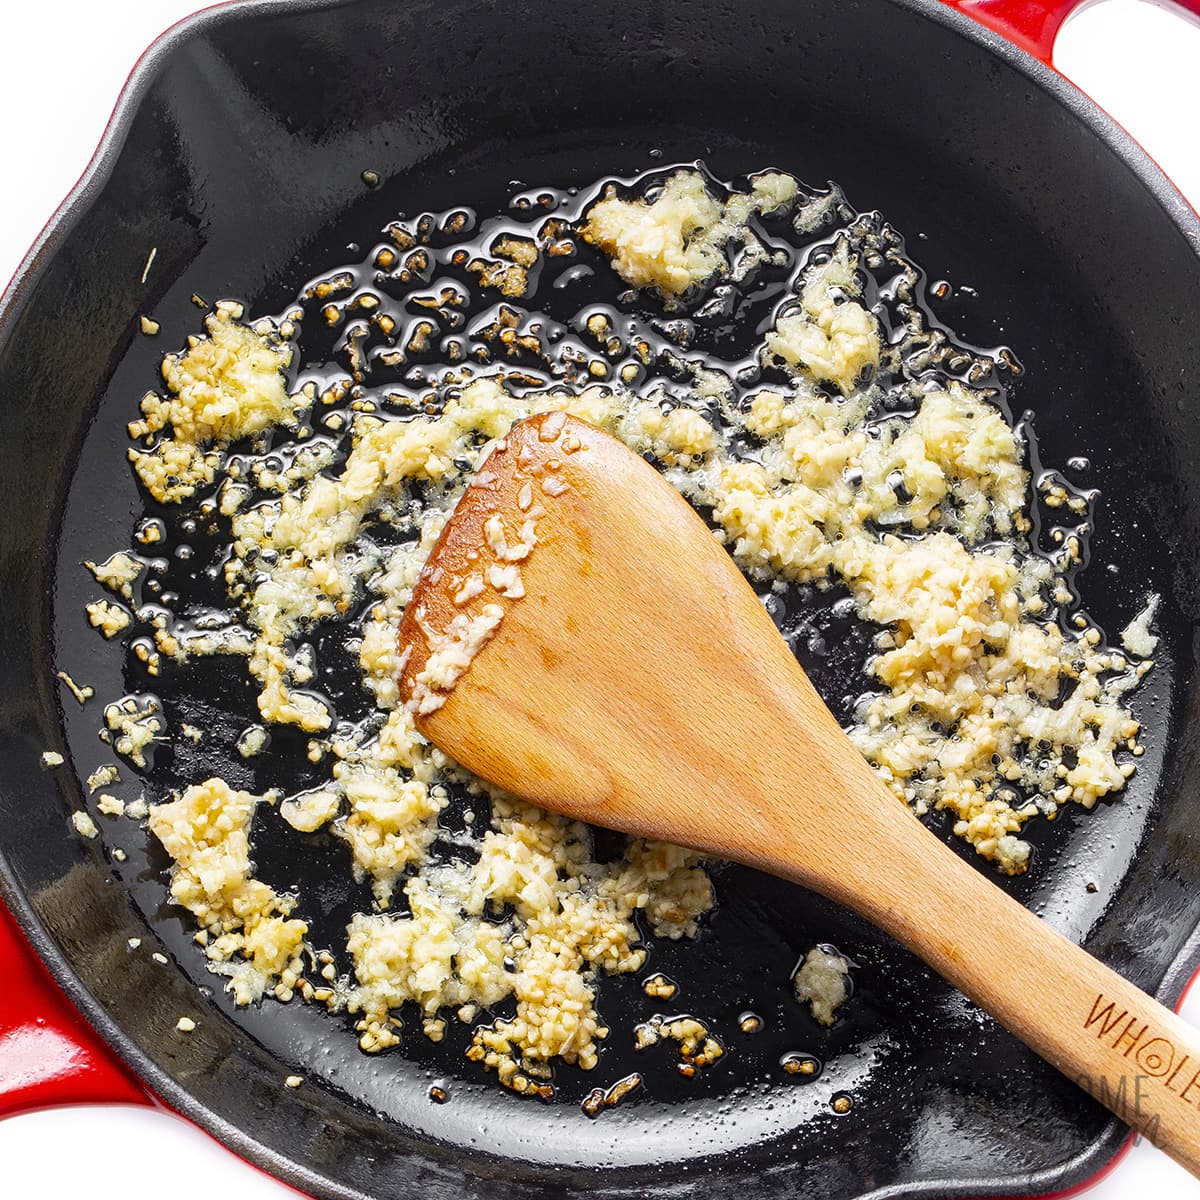 Sauteed garlic and ginger in a skillet.